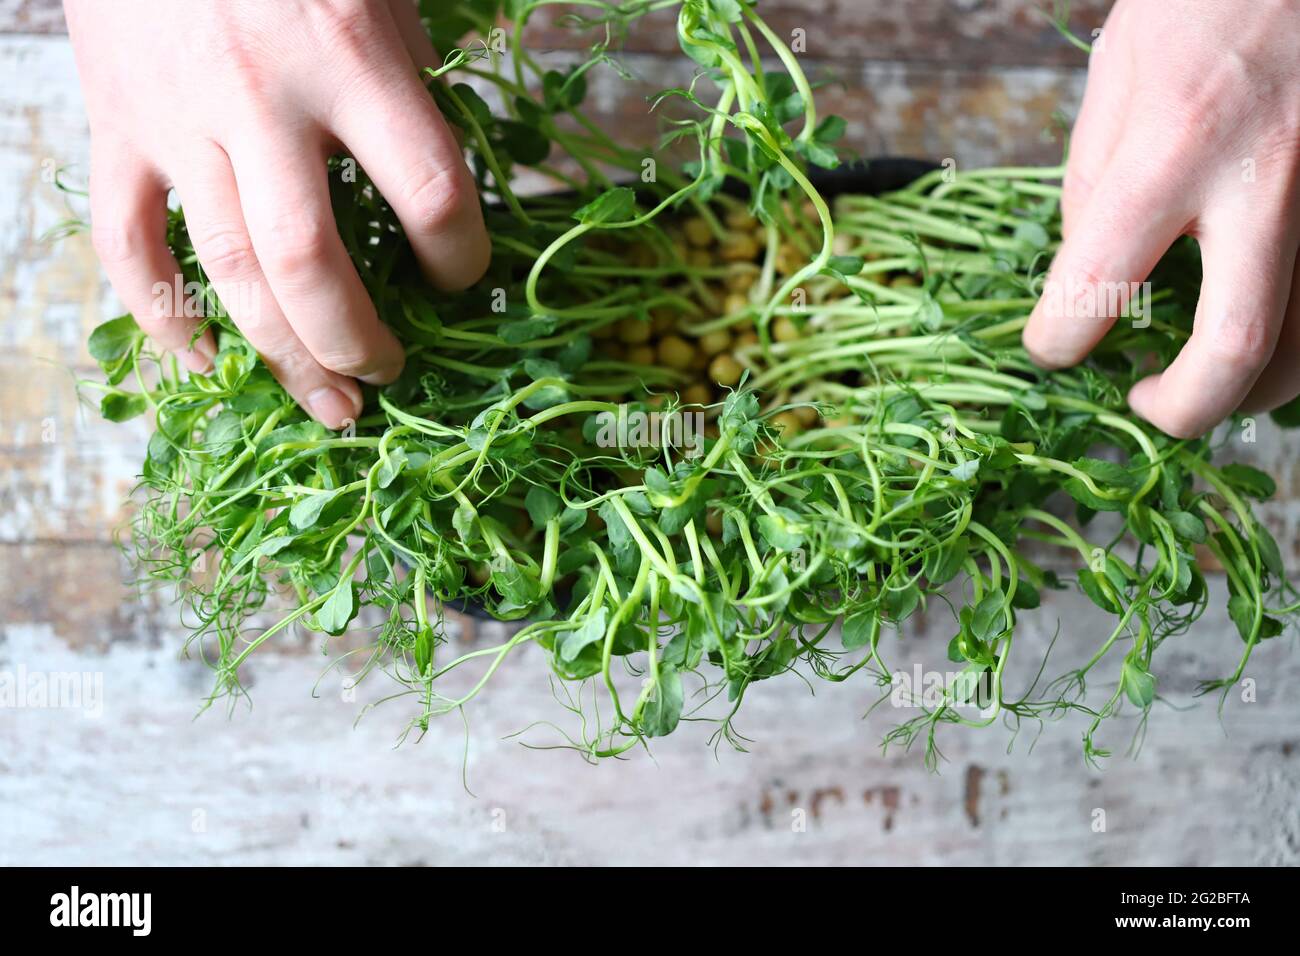 Hands touch the microgreen. Pea microgreens are a source of vitamins and minerals. Stock Photo